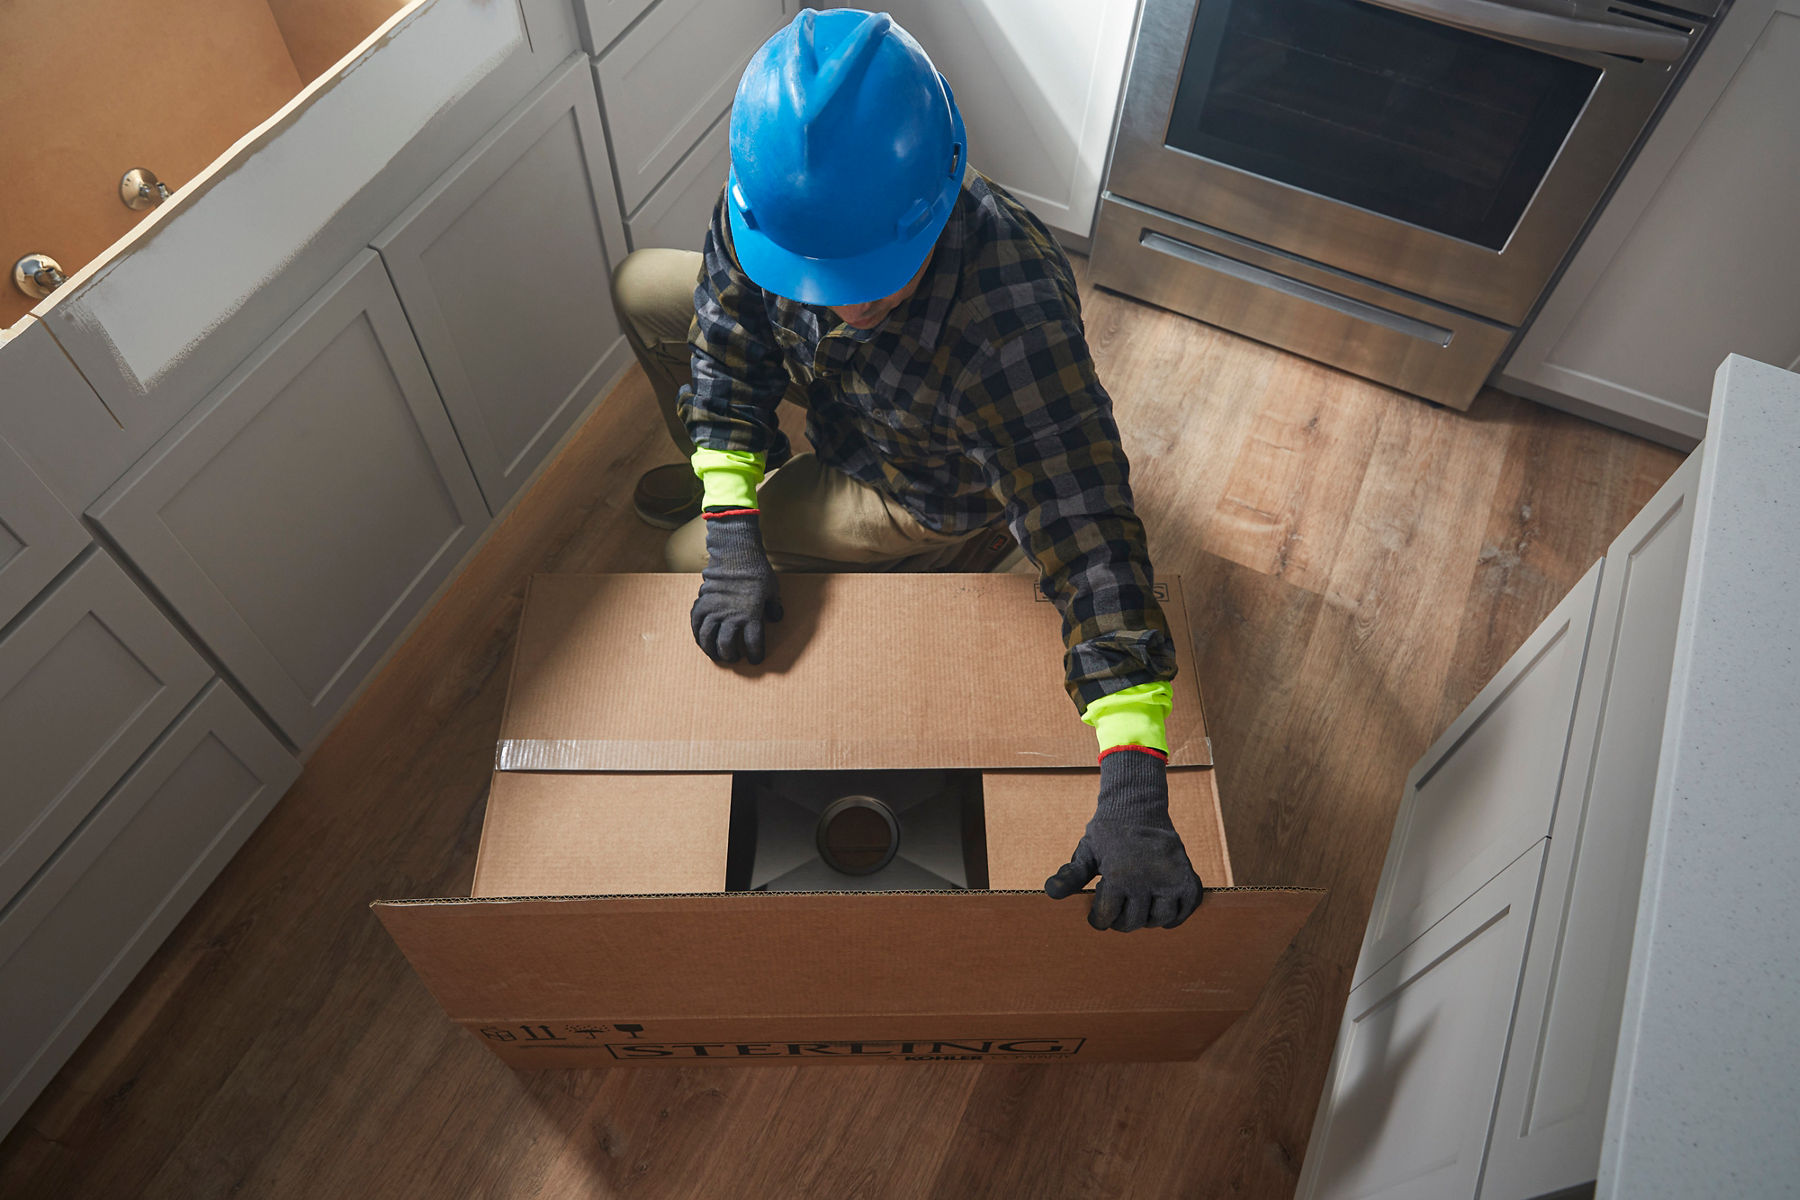 A contractor opens up a large cardboard box containing a Sterling stainless steel kitchen sink.